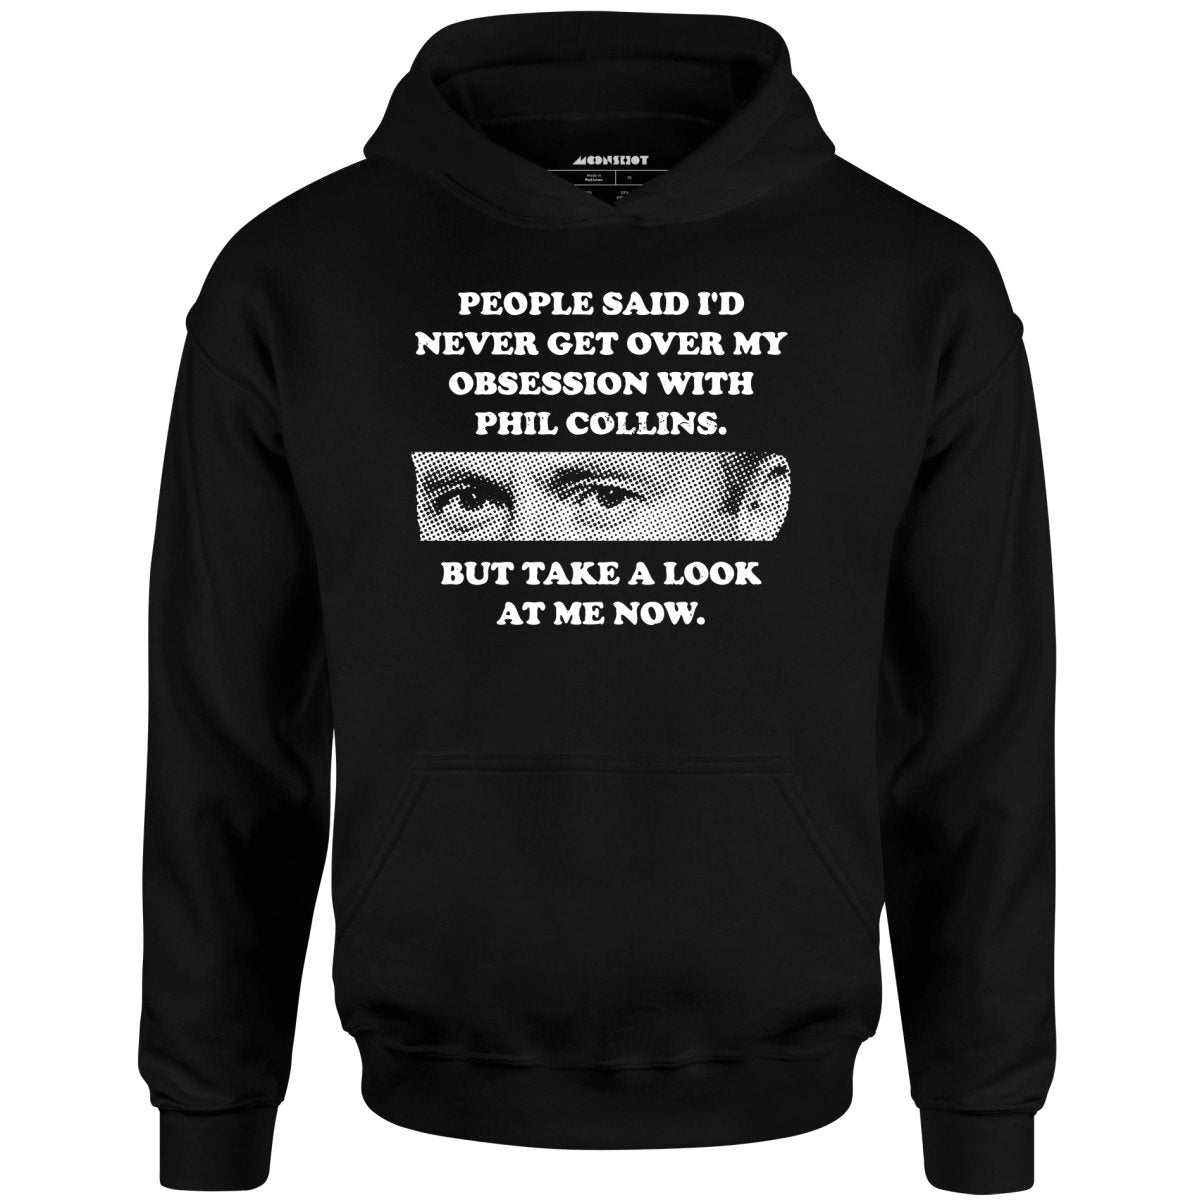 But Take a Look at Me Now - Unisex Hoodie